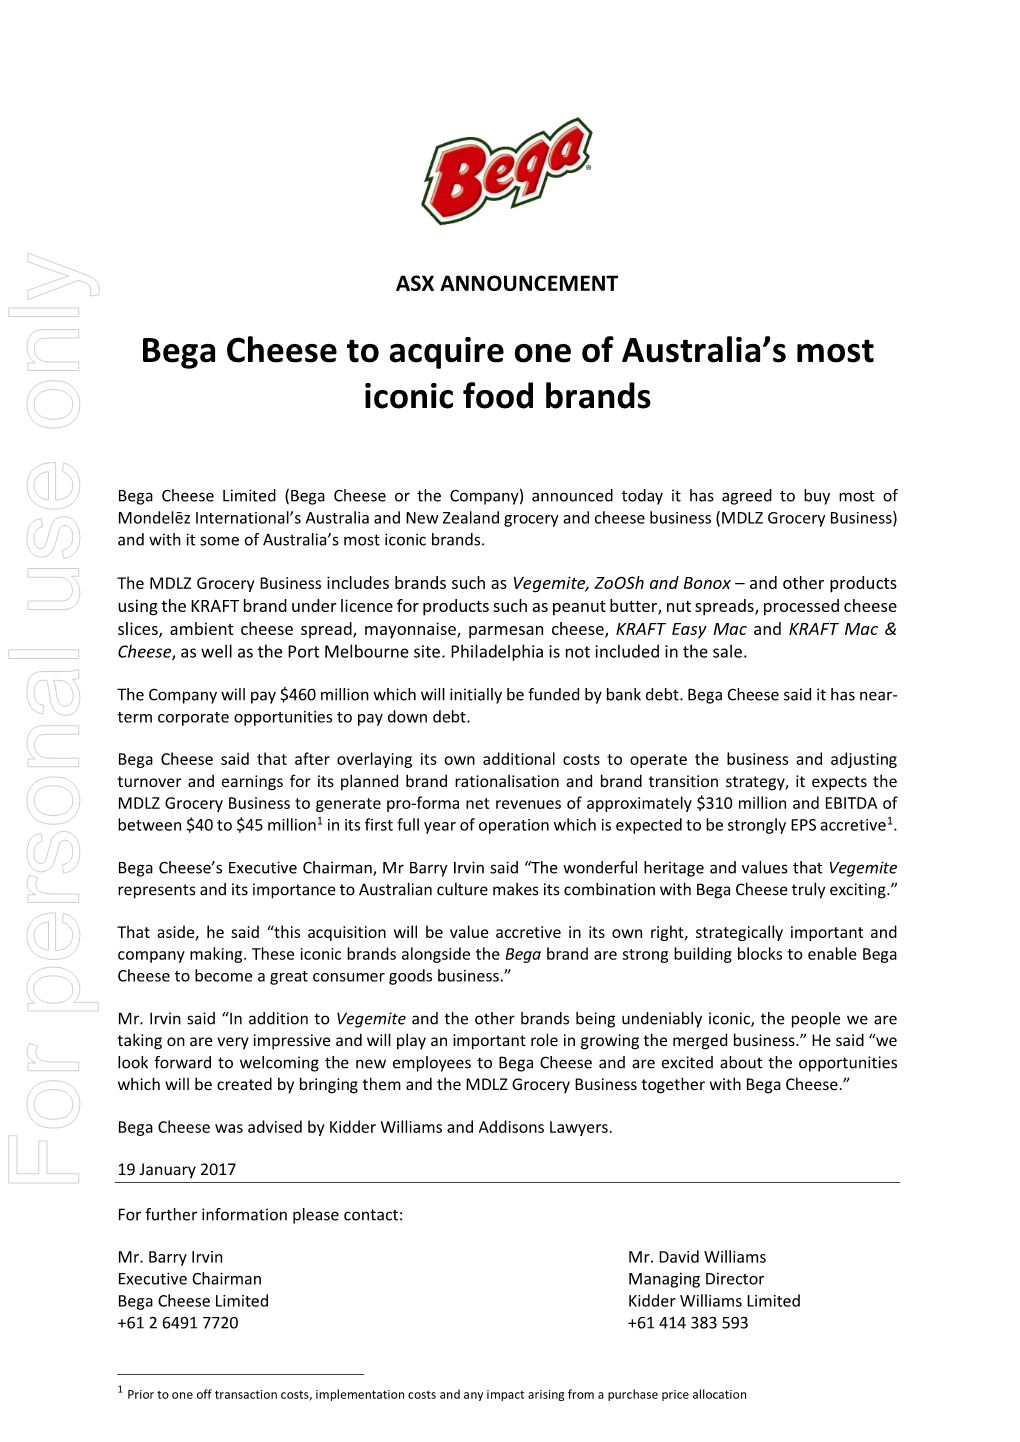 Bega Cheese to Acquire One of Australia's Most Iconic Food Brands